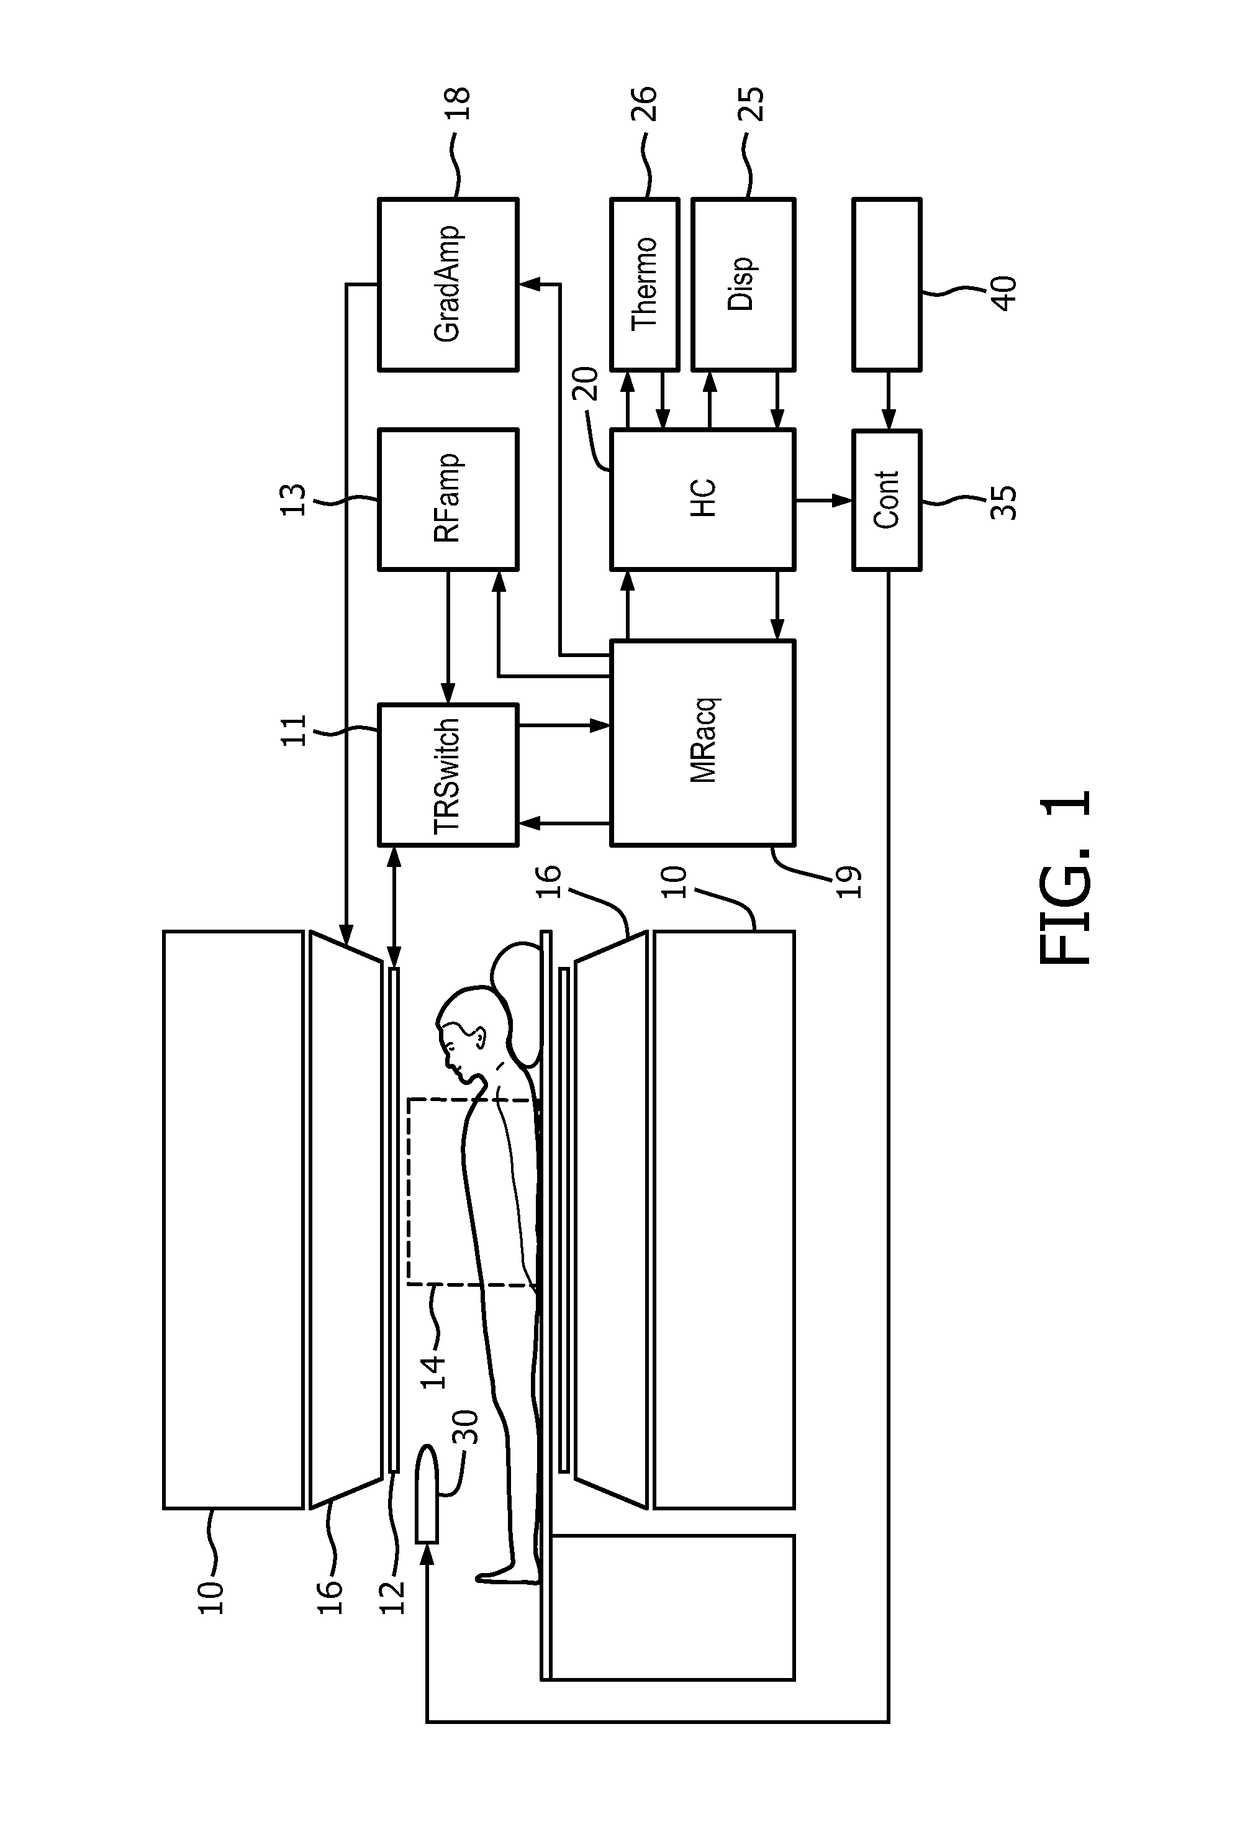 Guided thermal treatment system